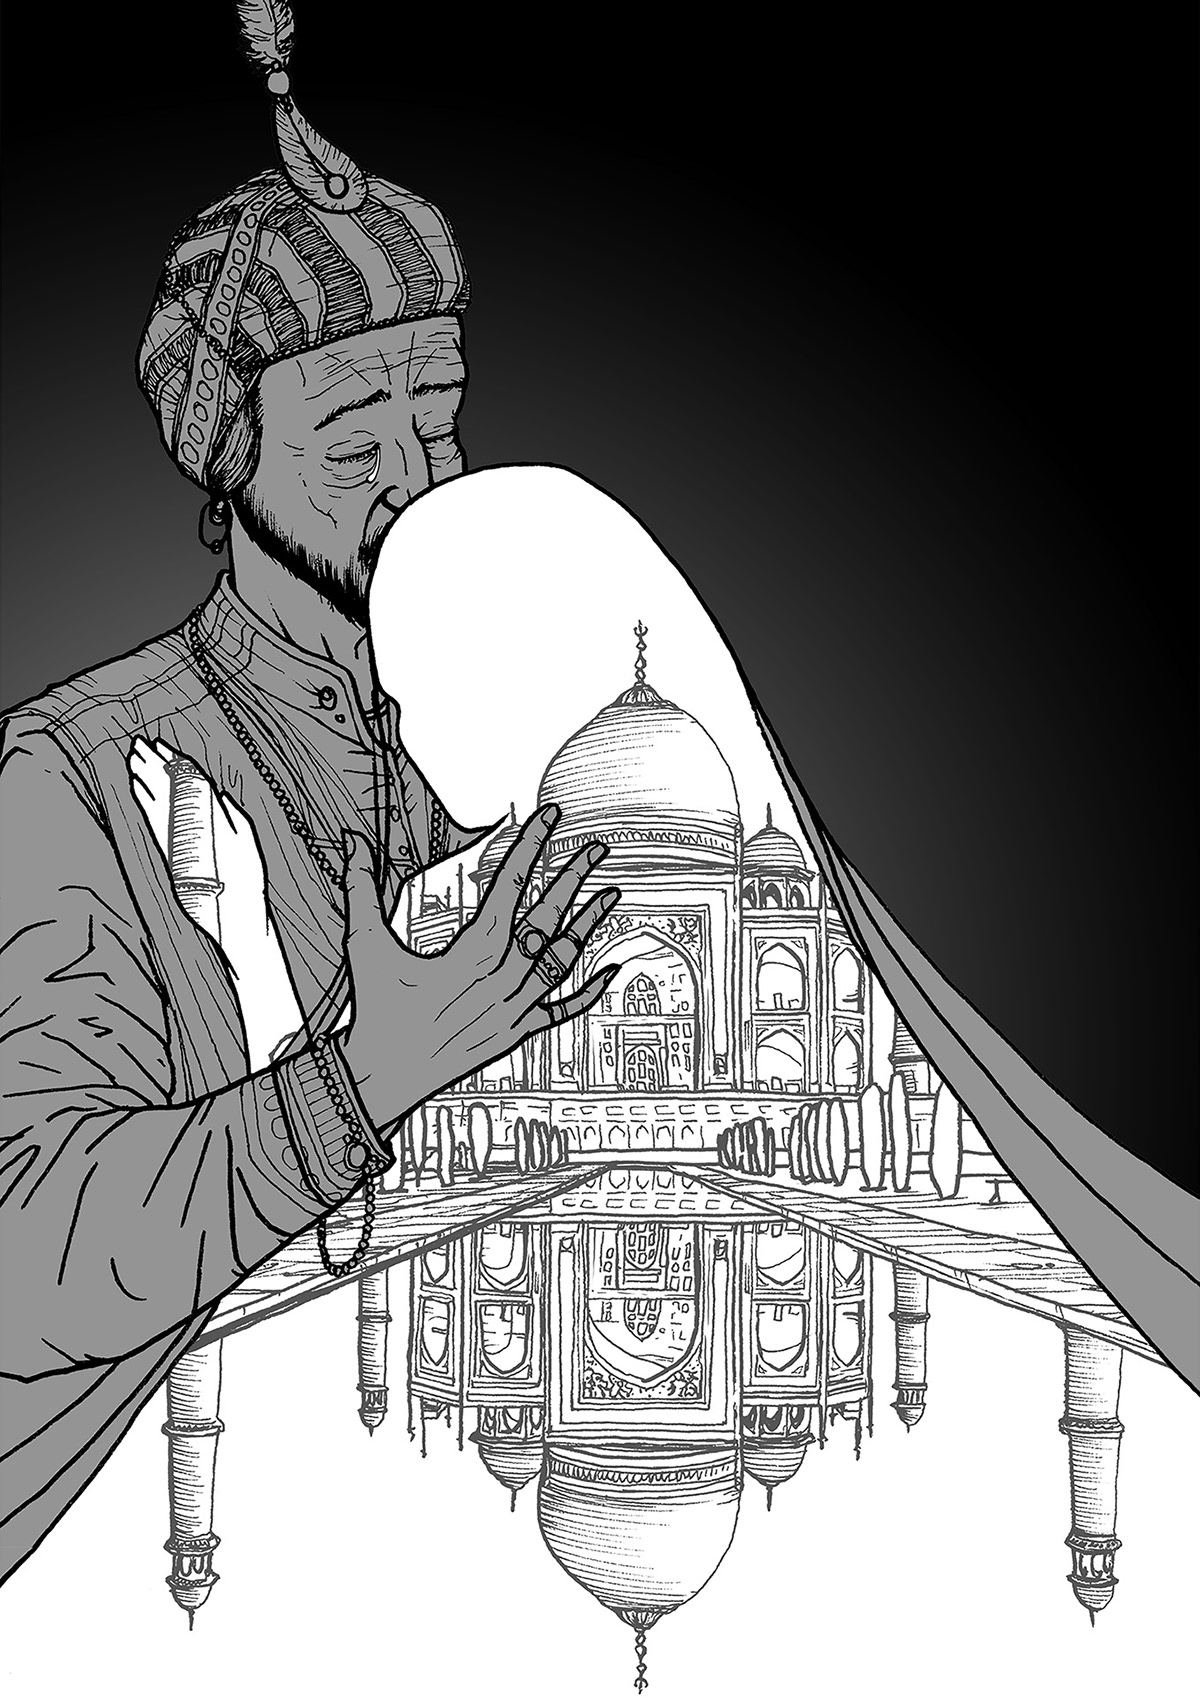 Taj Mahal Graphic Novel pen and ink ILLUSTRATION  cover Comic Book history India Love grief